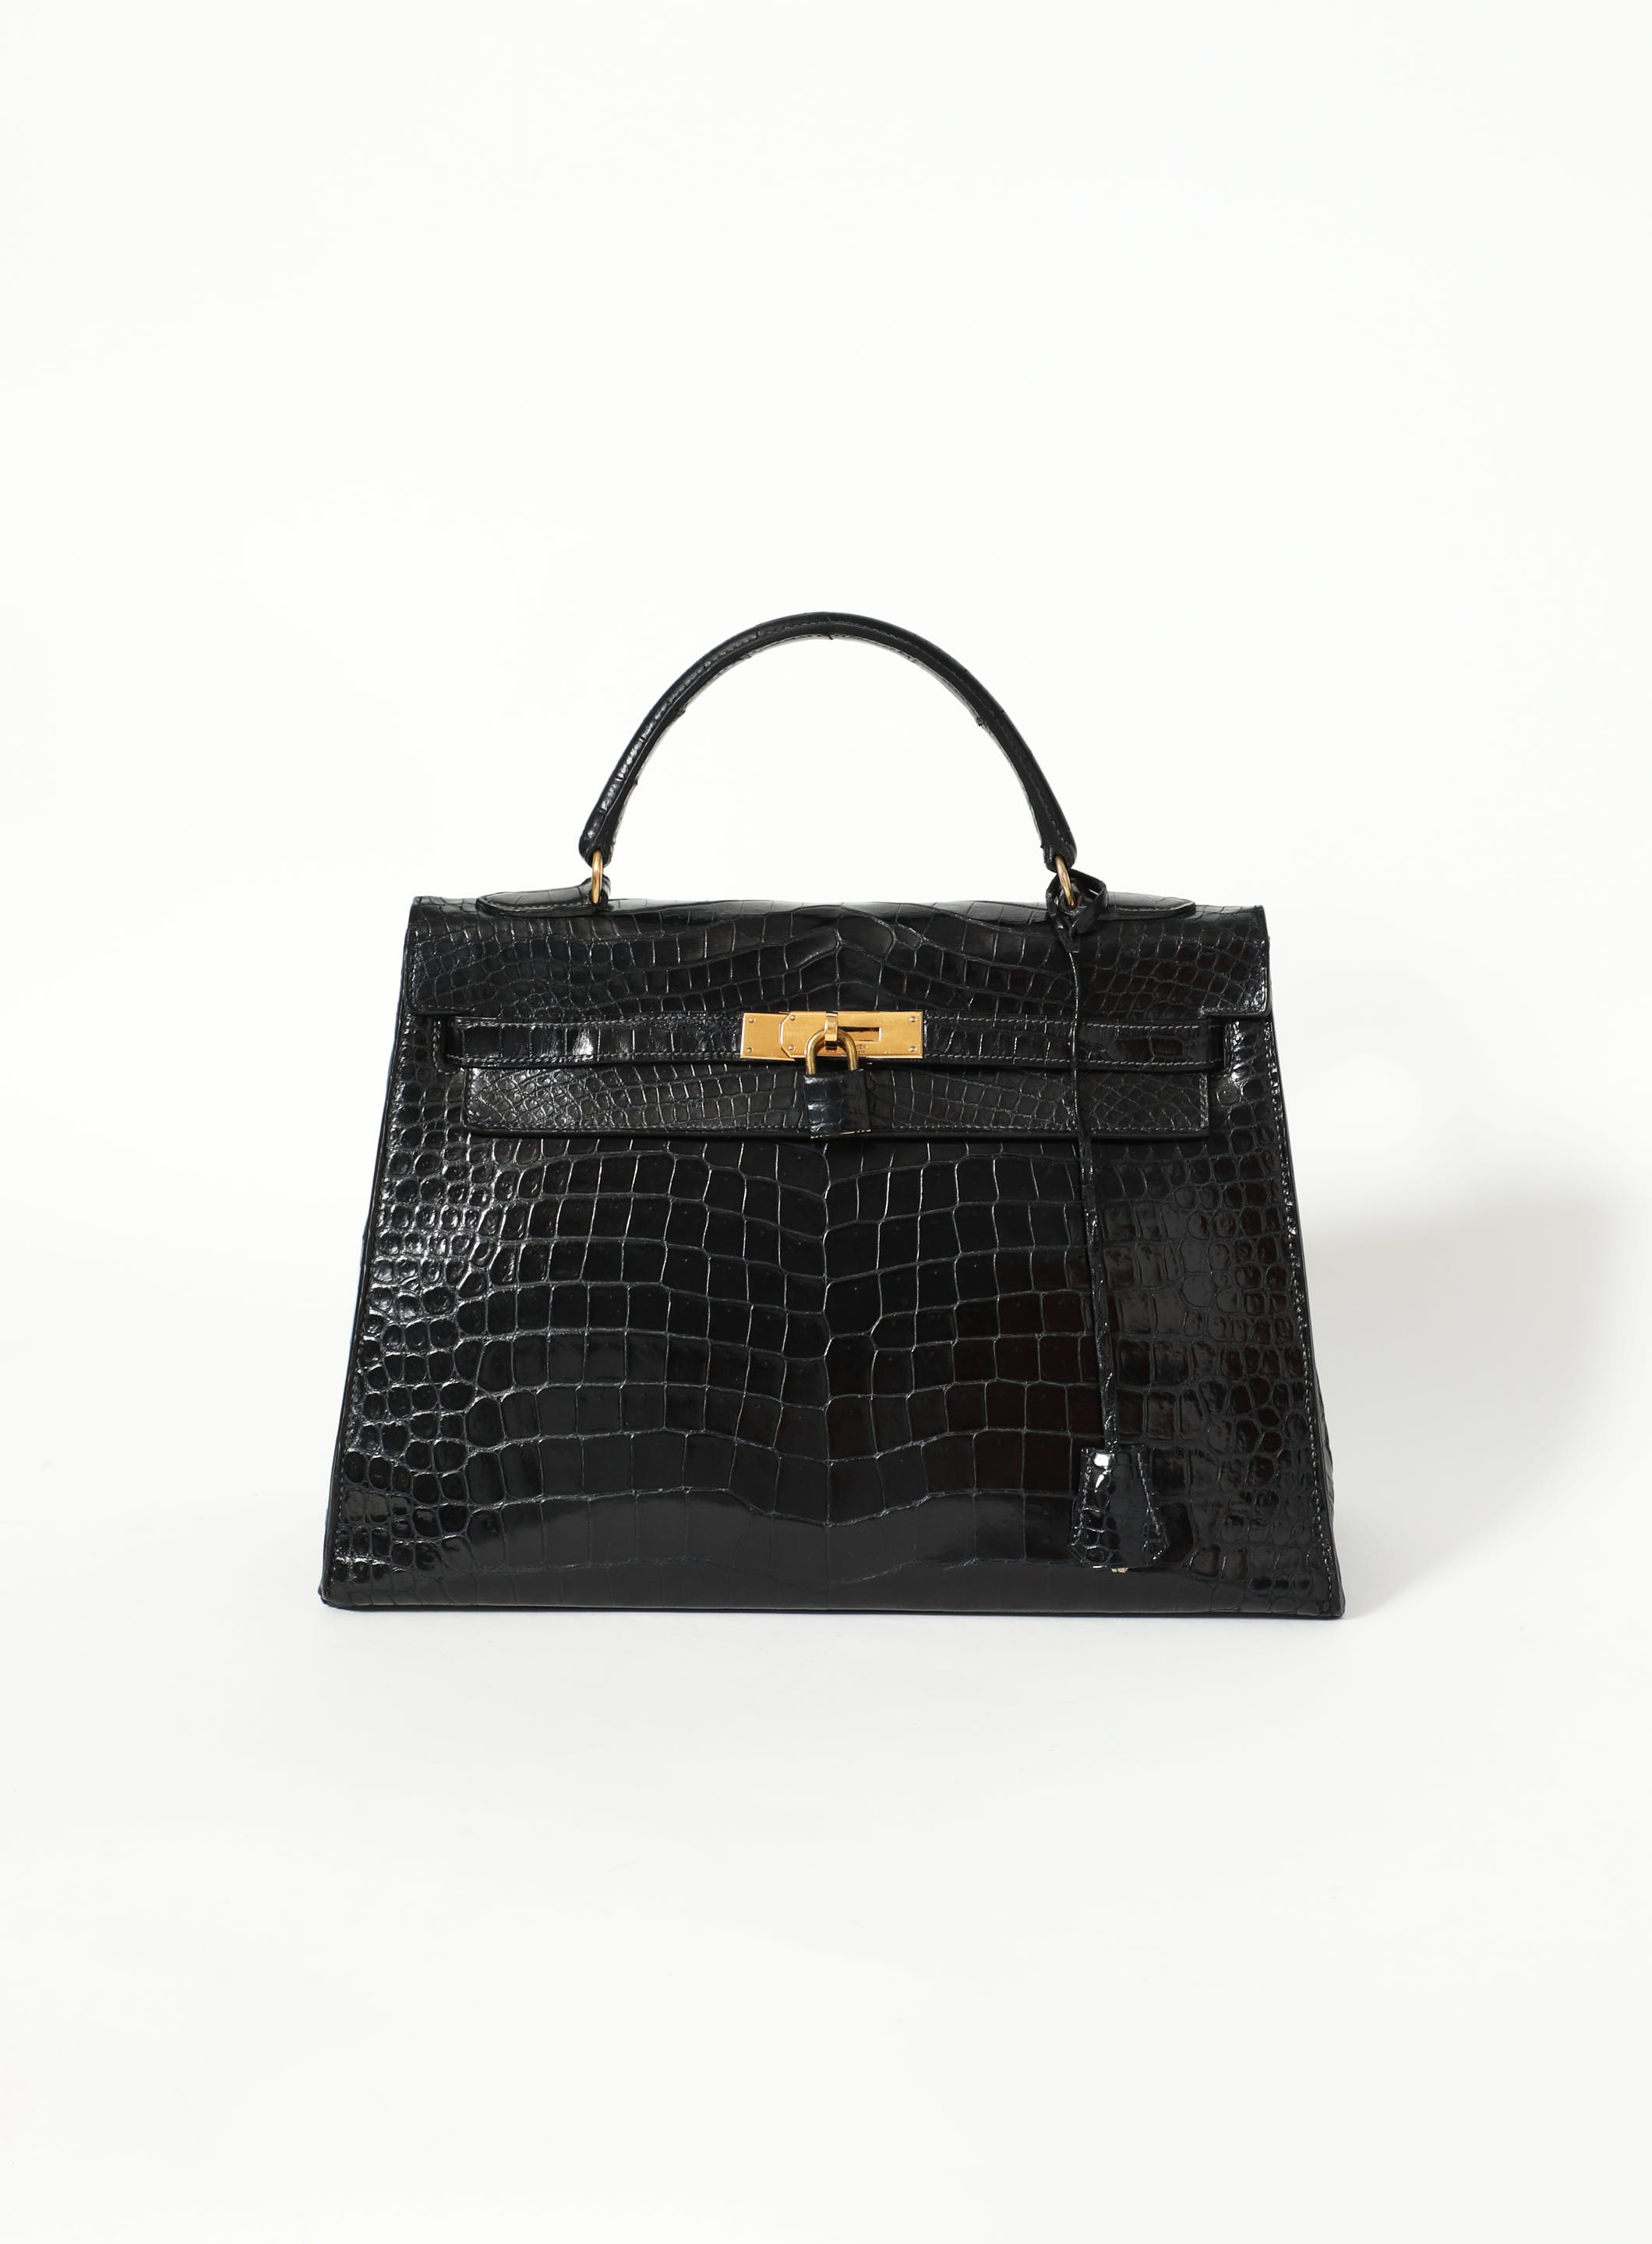 Hermes Kelly 32 in crocodile Porosus Item not available on